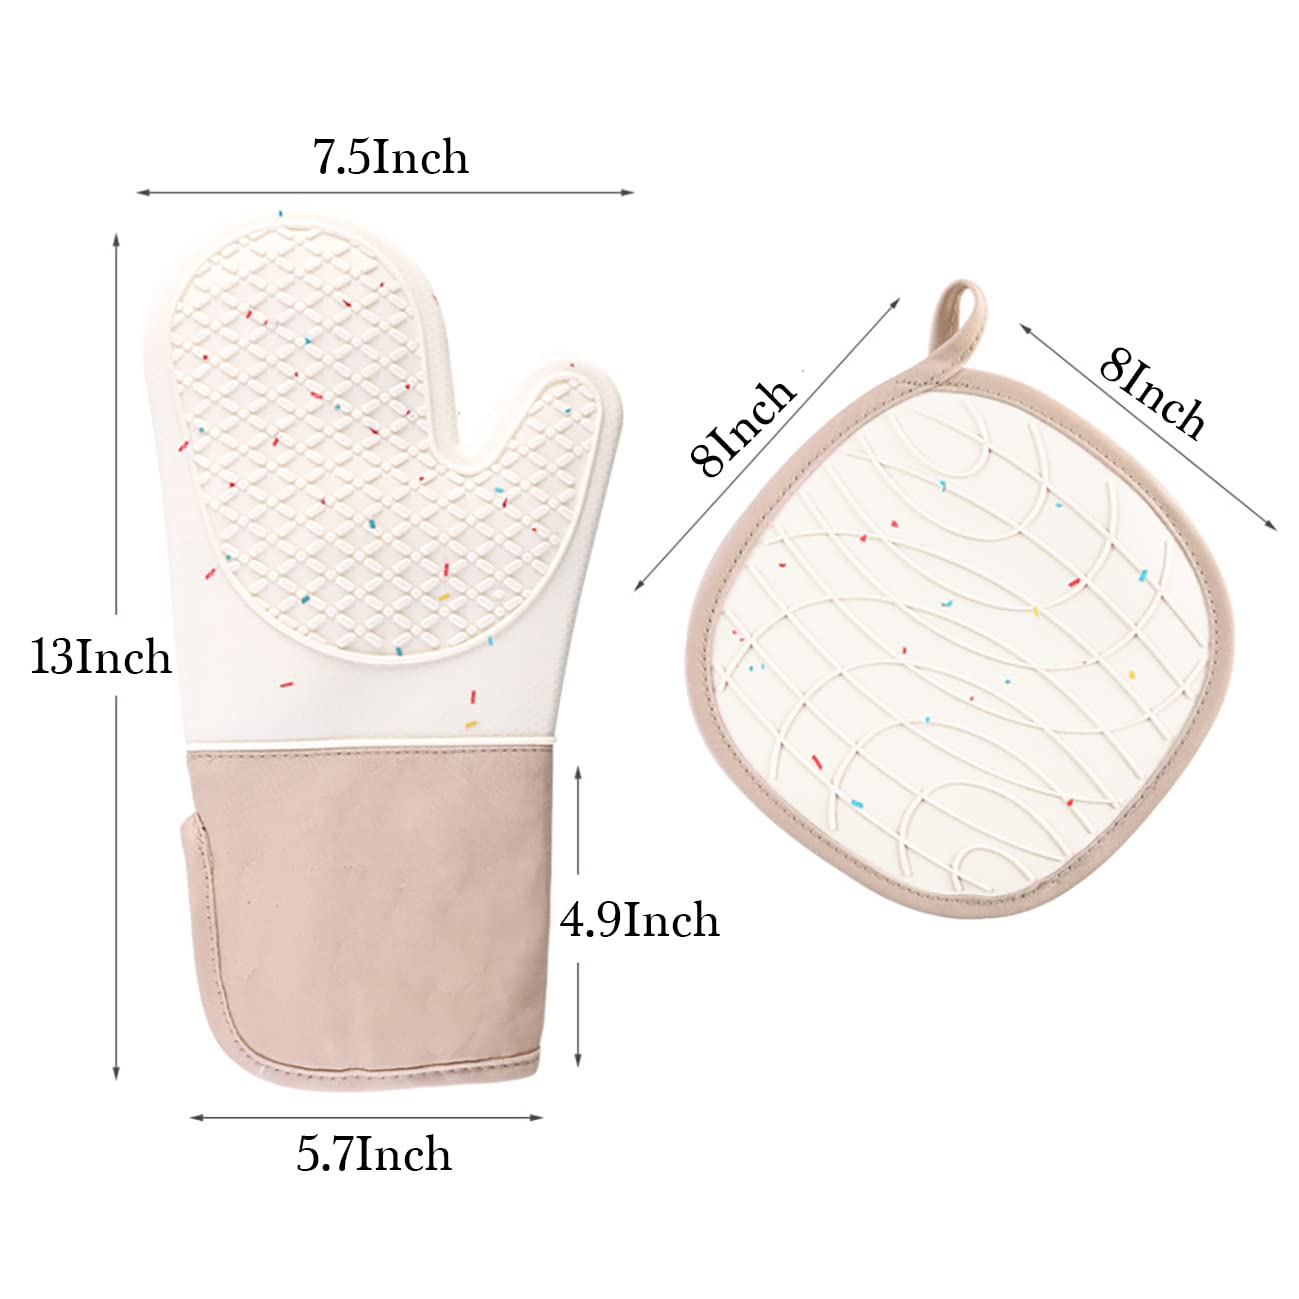 Oven Mitts and Pot Holders Sets 4Pcs Set, Lengthen High Heat Resistant Oven Glove Set, Waterproof Silicone Fashion Cute Microwave Gloves Safe for Baking,Cooking, BBQ